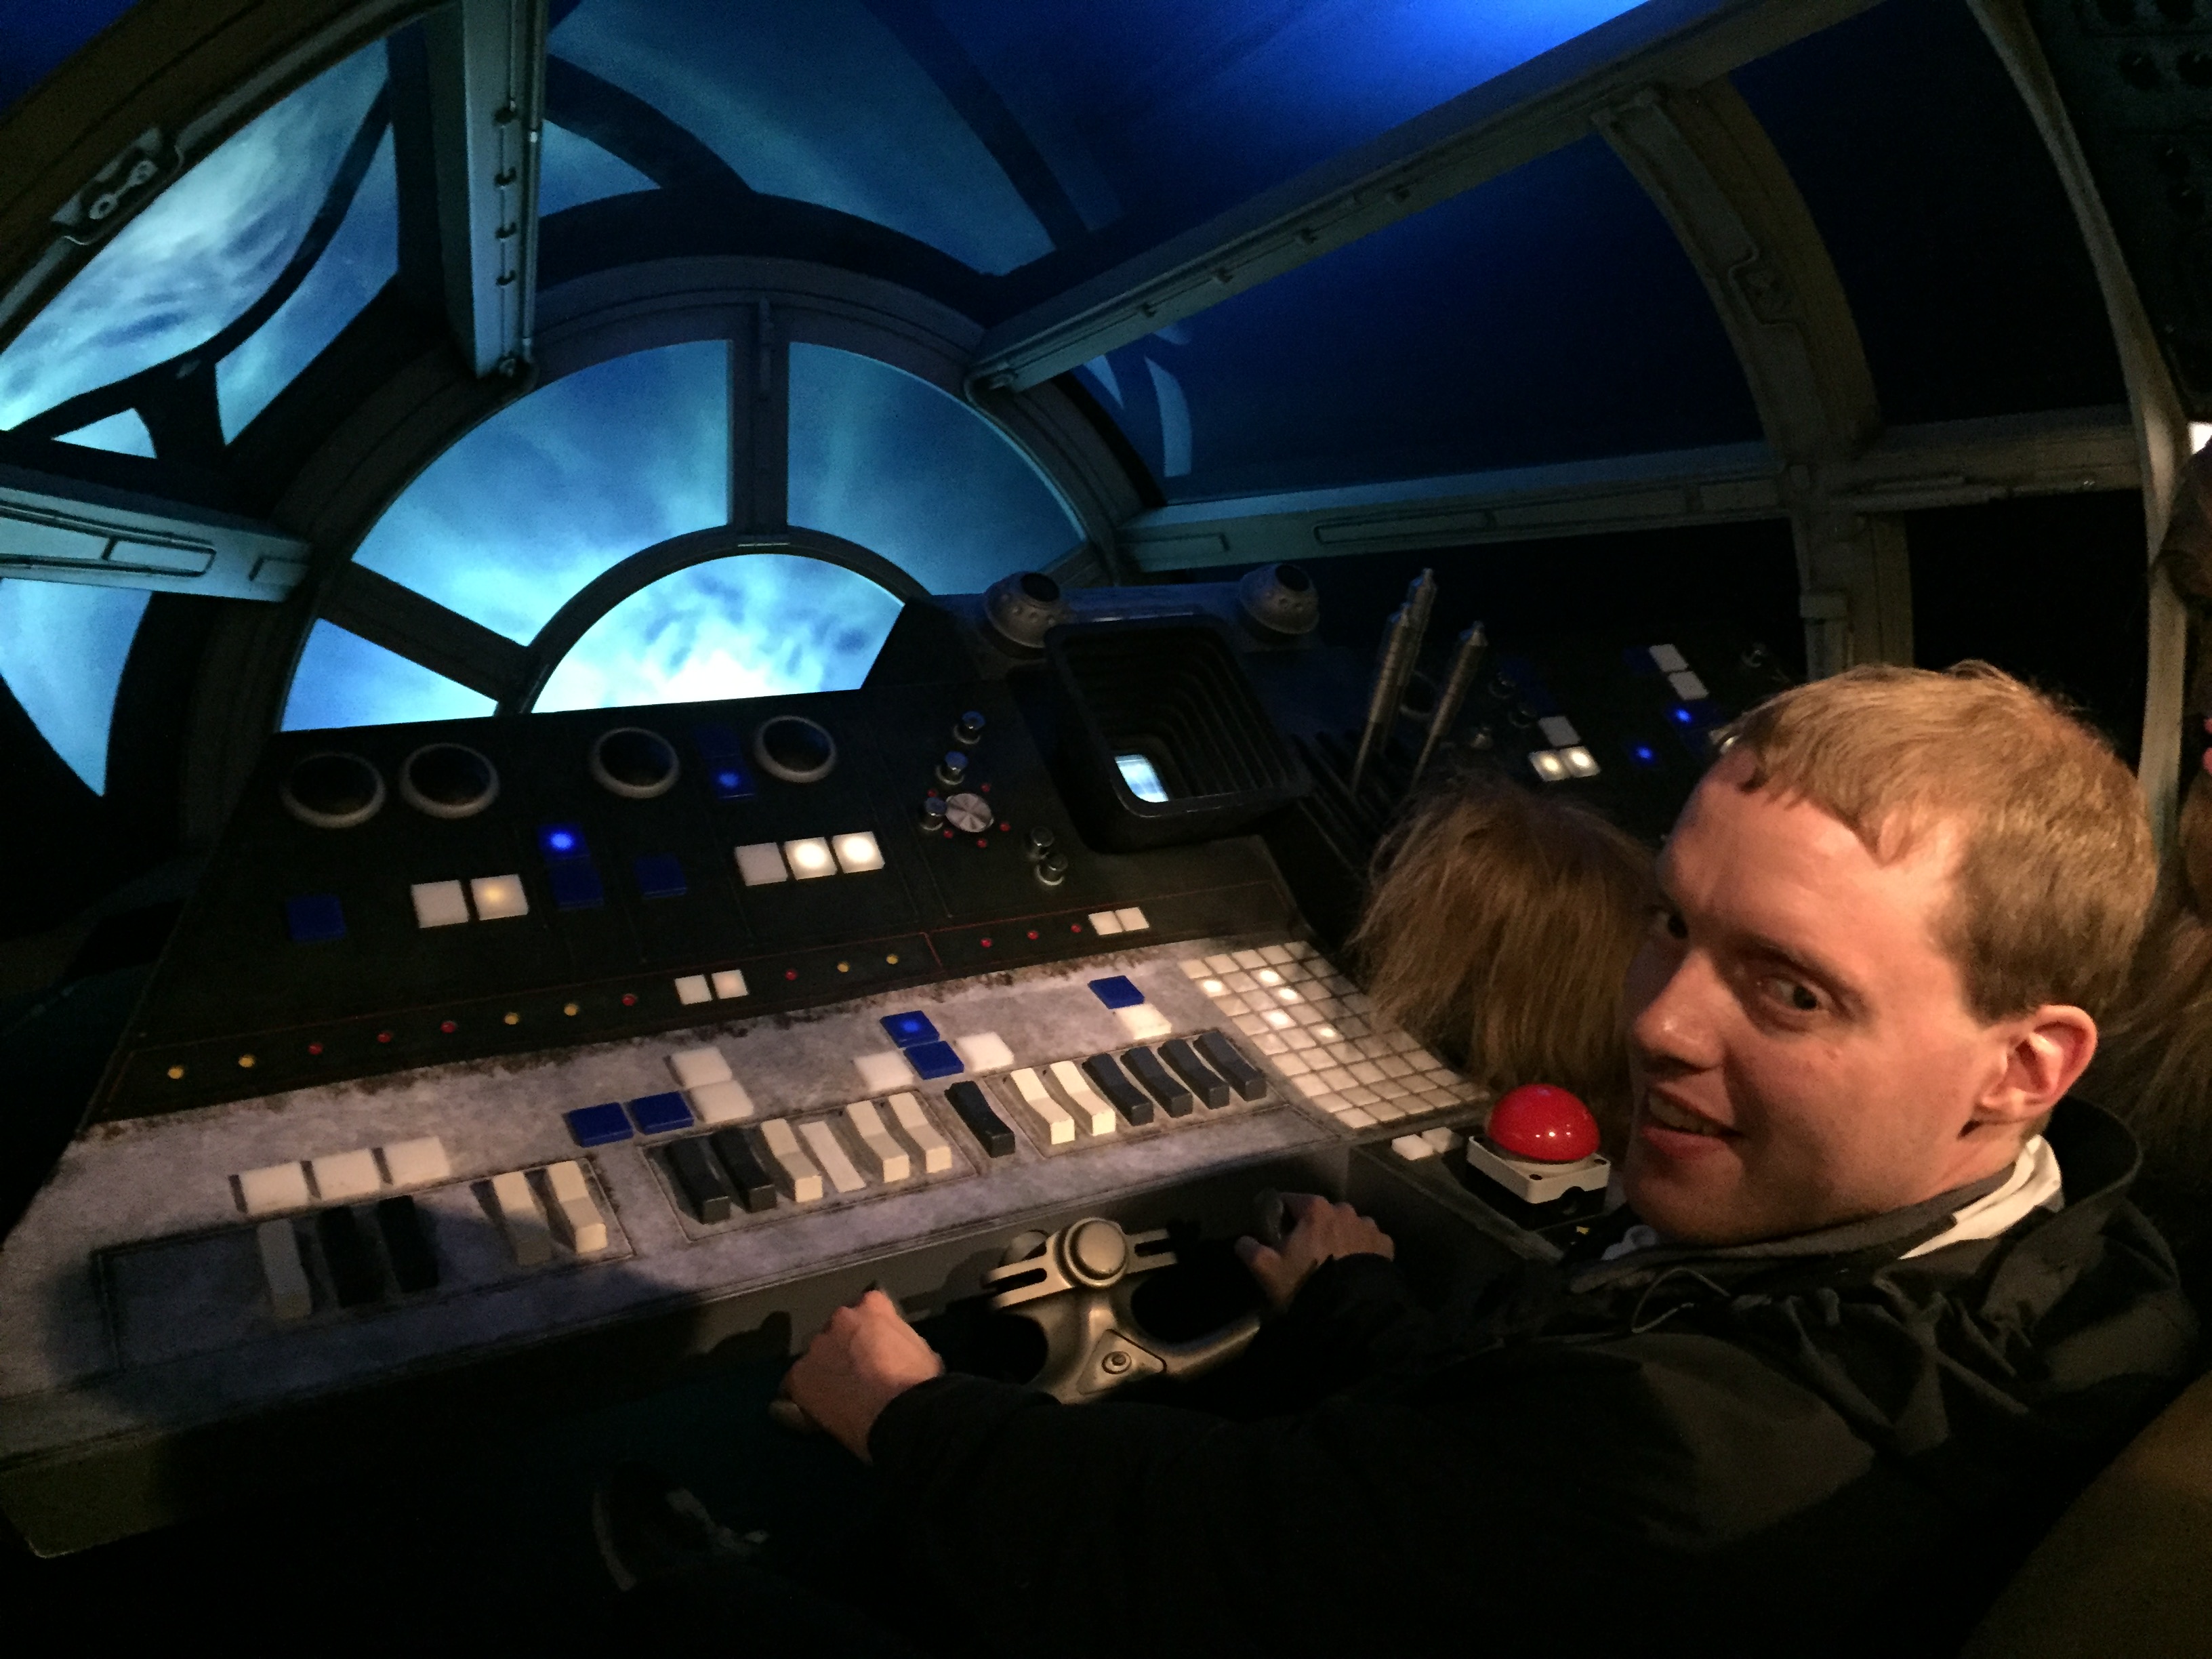 Glen sitting and grasping the steering control in the cockpit of the Millennium Falcon, the dashboard of which has black, white and blue chunky, tactile buttons that contrast well against the grey surface. Light outside the cockpit window gives the impression that he's zooming through space.